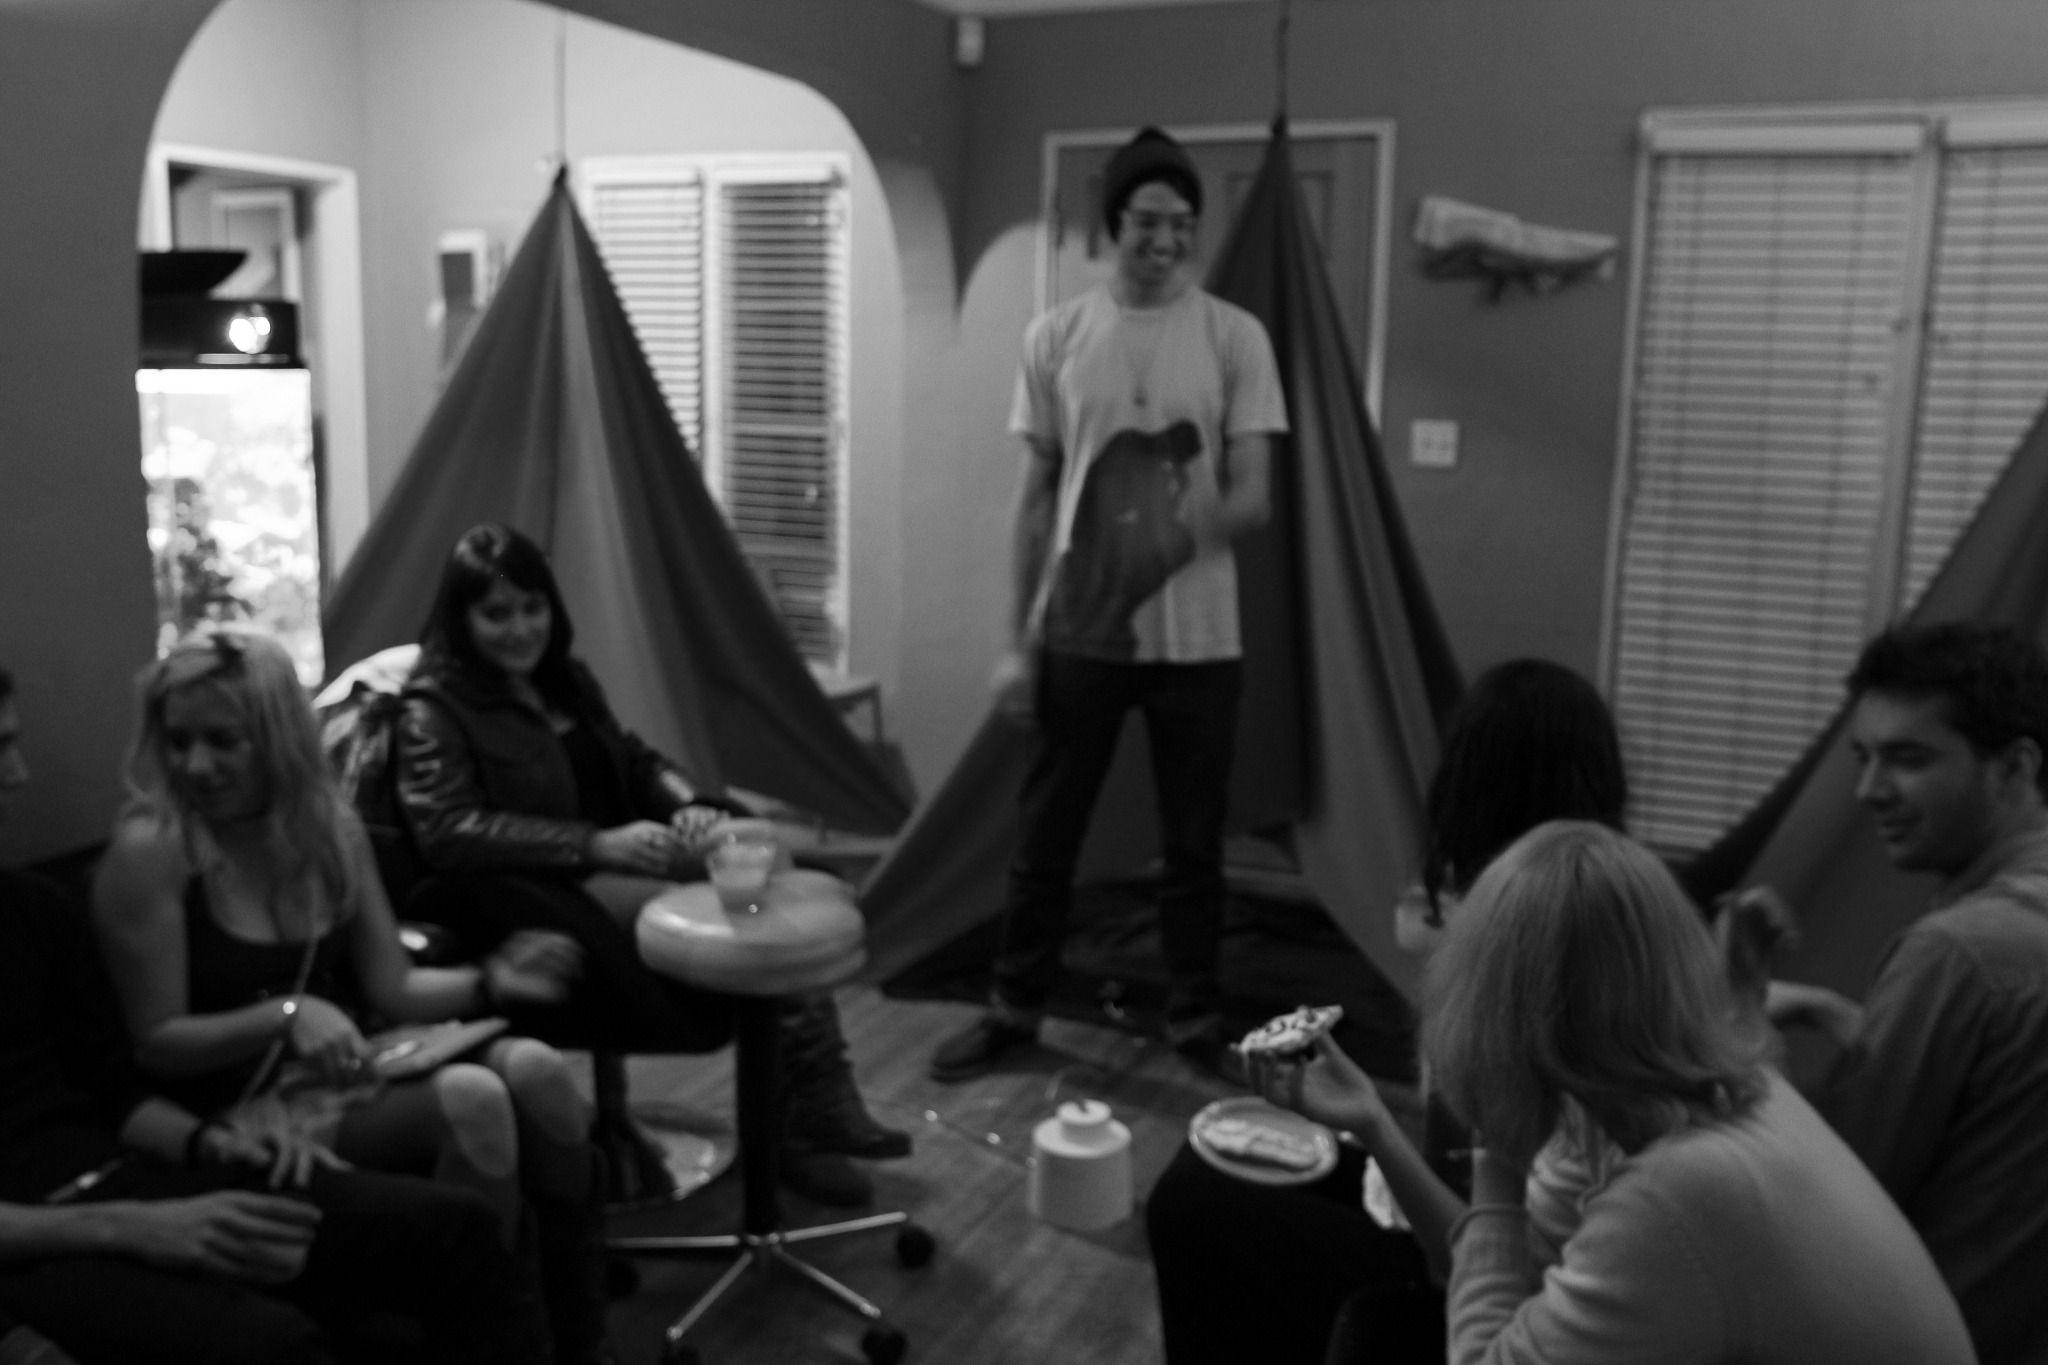 There is a dark, grayscale picture of various people sitting inside a small room. There are three tents in the background. One person is standing, and there are five or six people sitting down and talking to each other. Everyone is smiling.